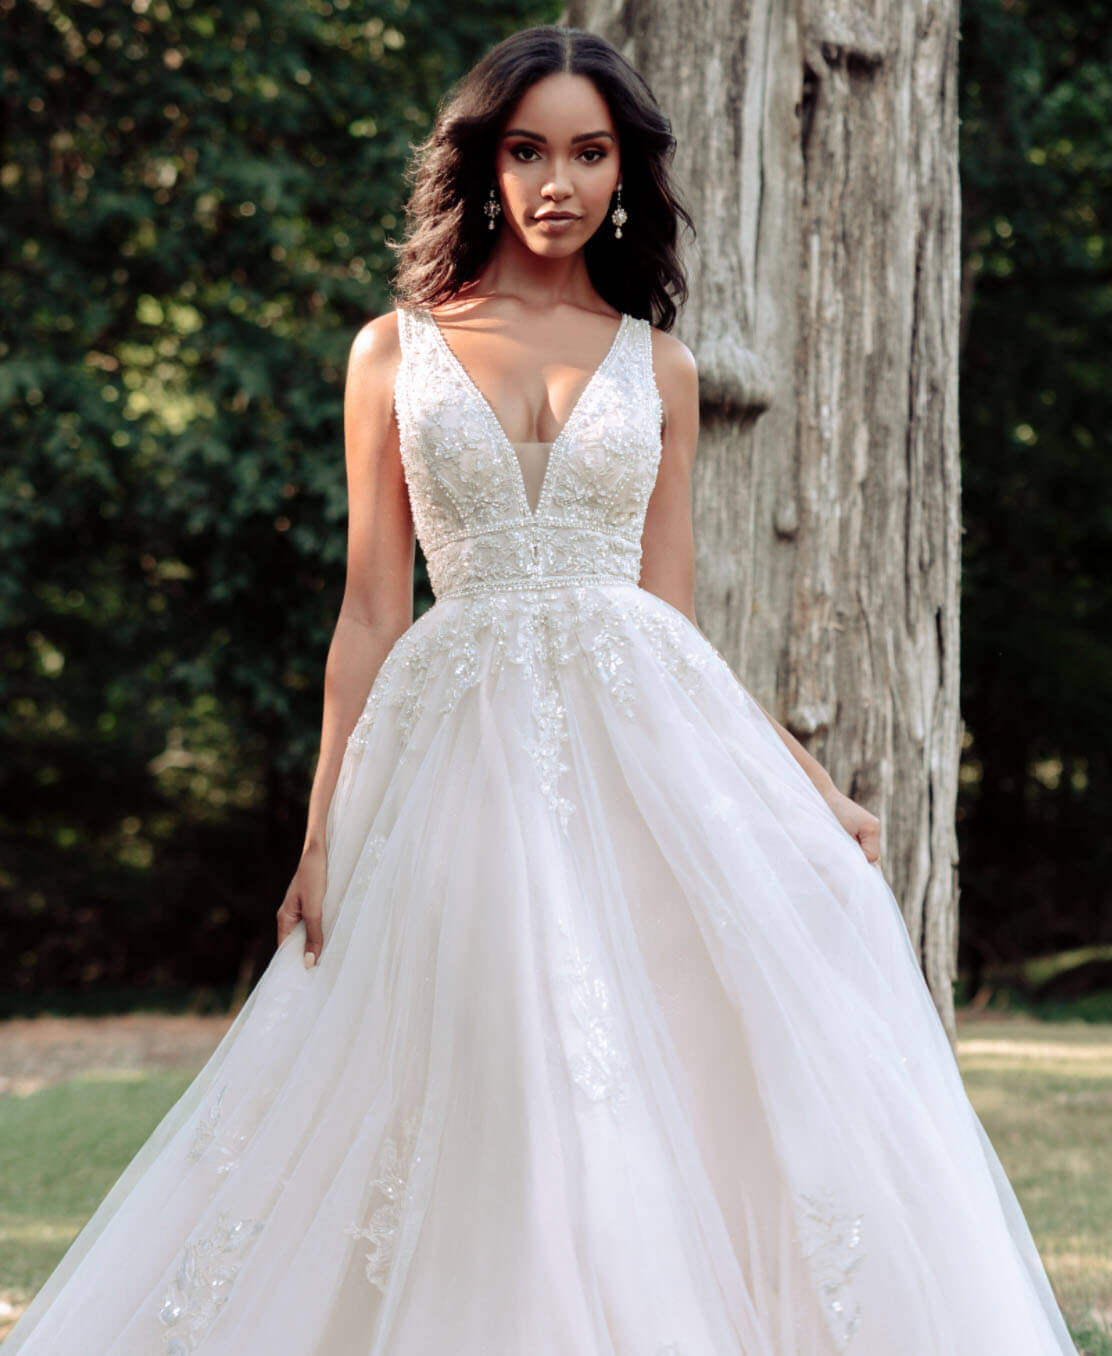 Model wearing a white gown by Allure Bridal